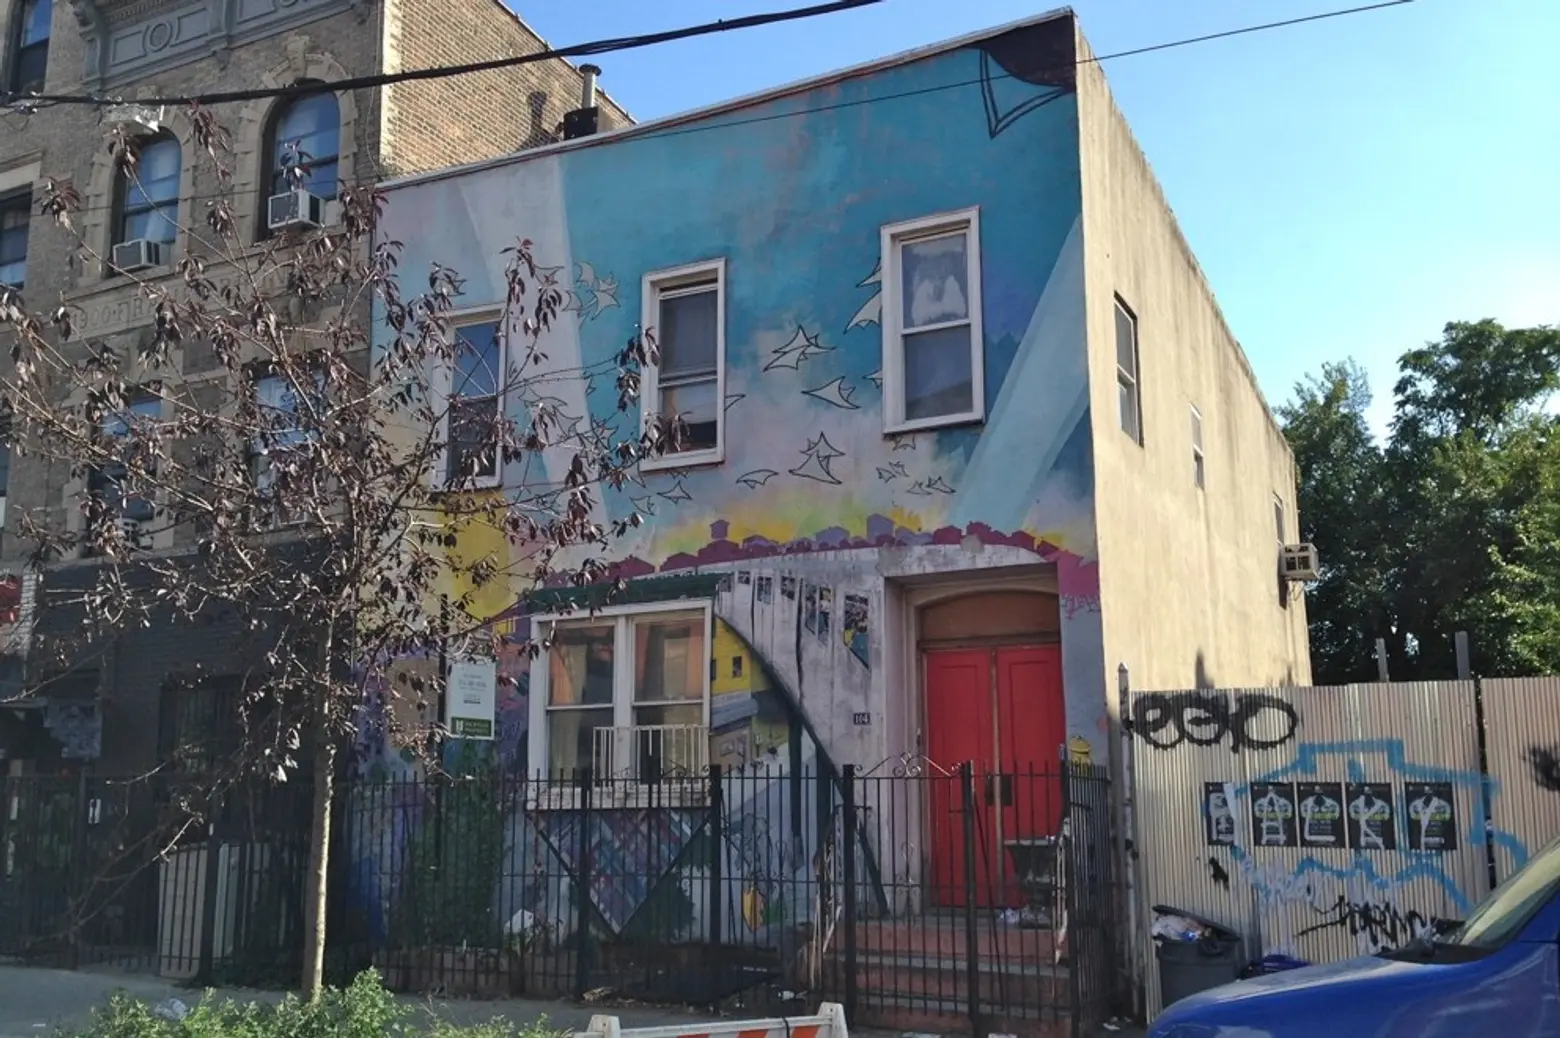 Bushwick Residents Paint Colorful Murals on Their Homes; Brooklyn’s Macy’s to Get a New Space